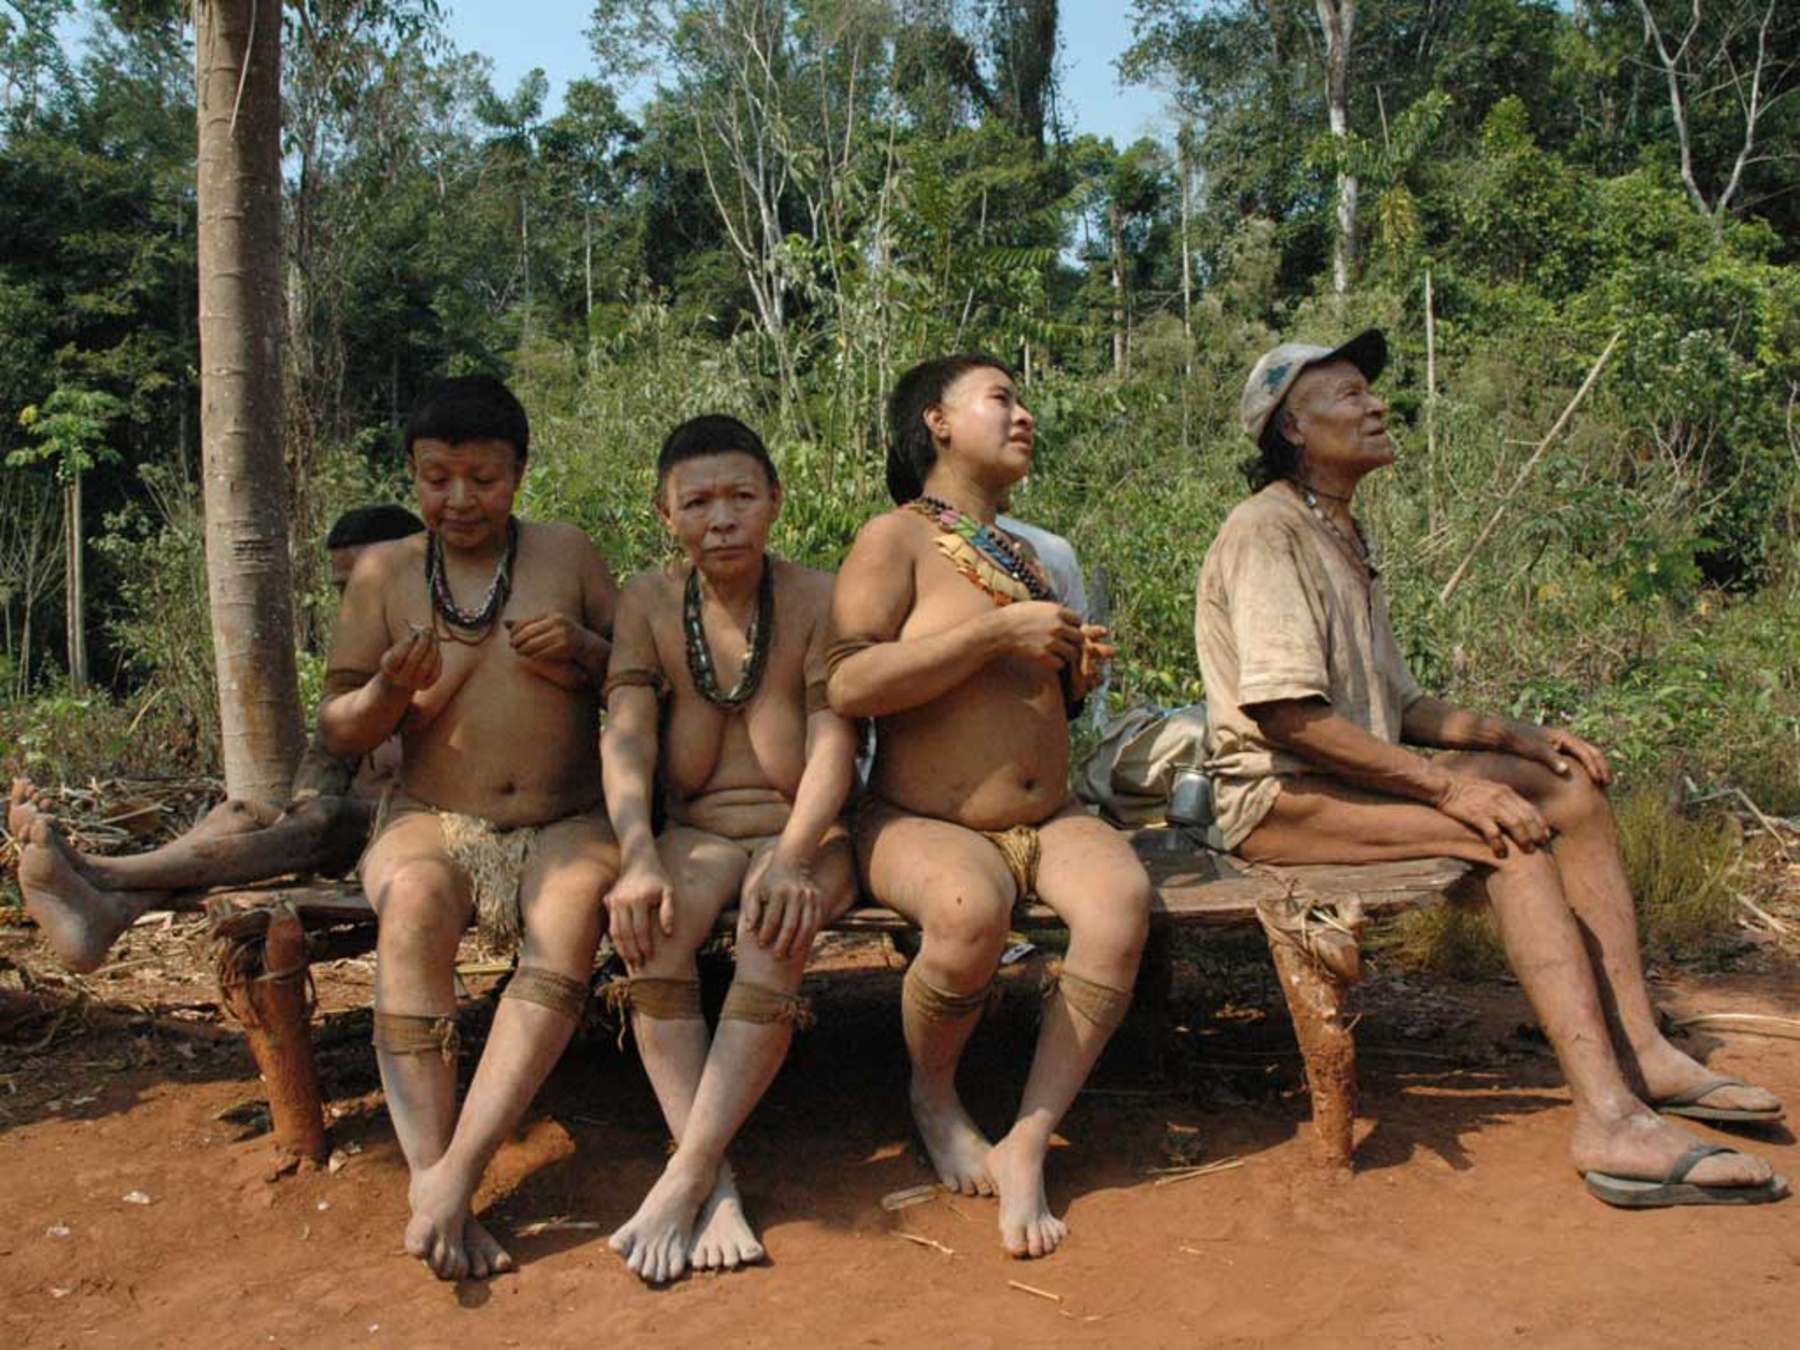 Tribal Animal Sex - Uncontacted tribes: the threats - Survival International